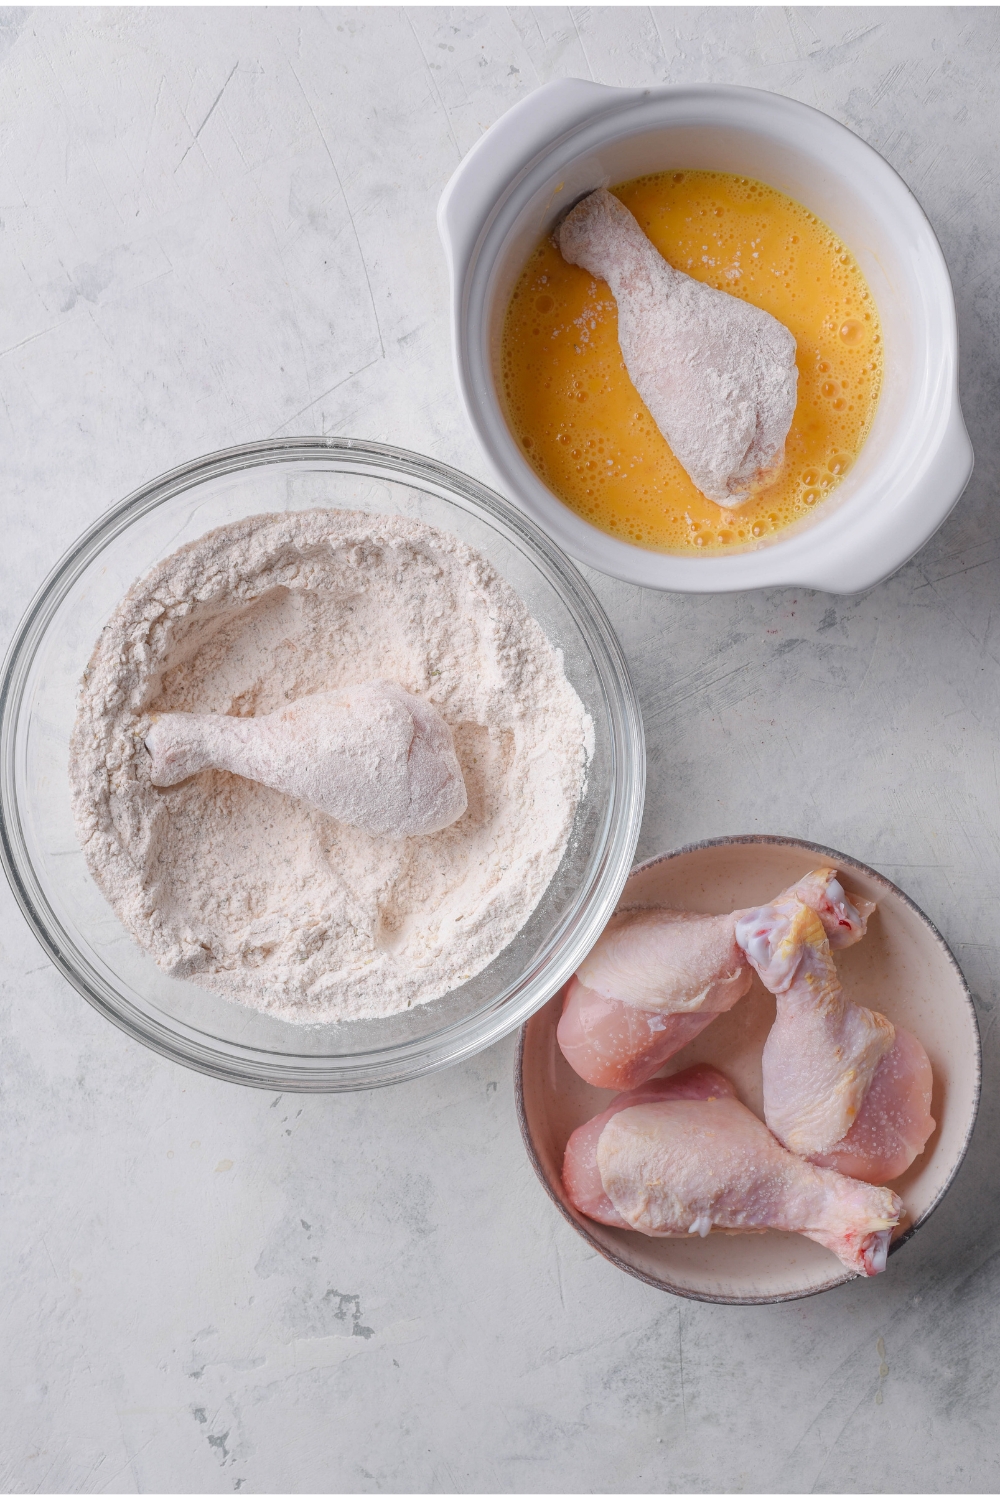 Three bowls of raw chicken, a dry flour mixture with a piece of chicken in it, and a bowl of beaten eggs with a piece of flour-coated chicken in it.